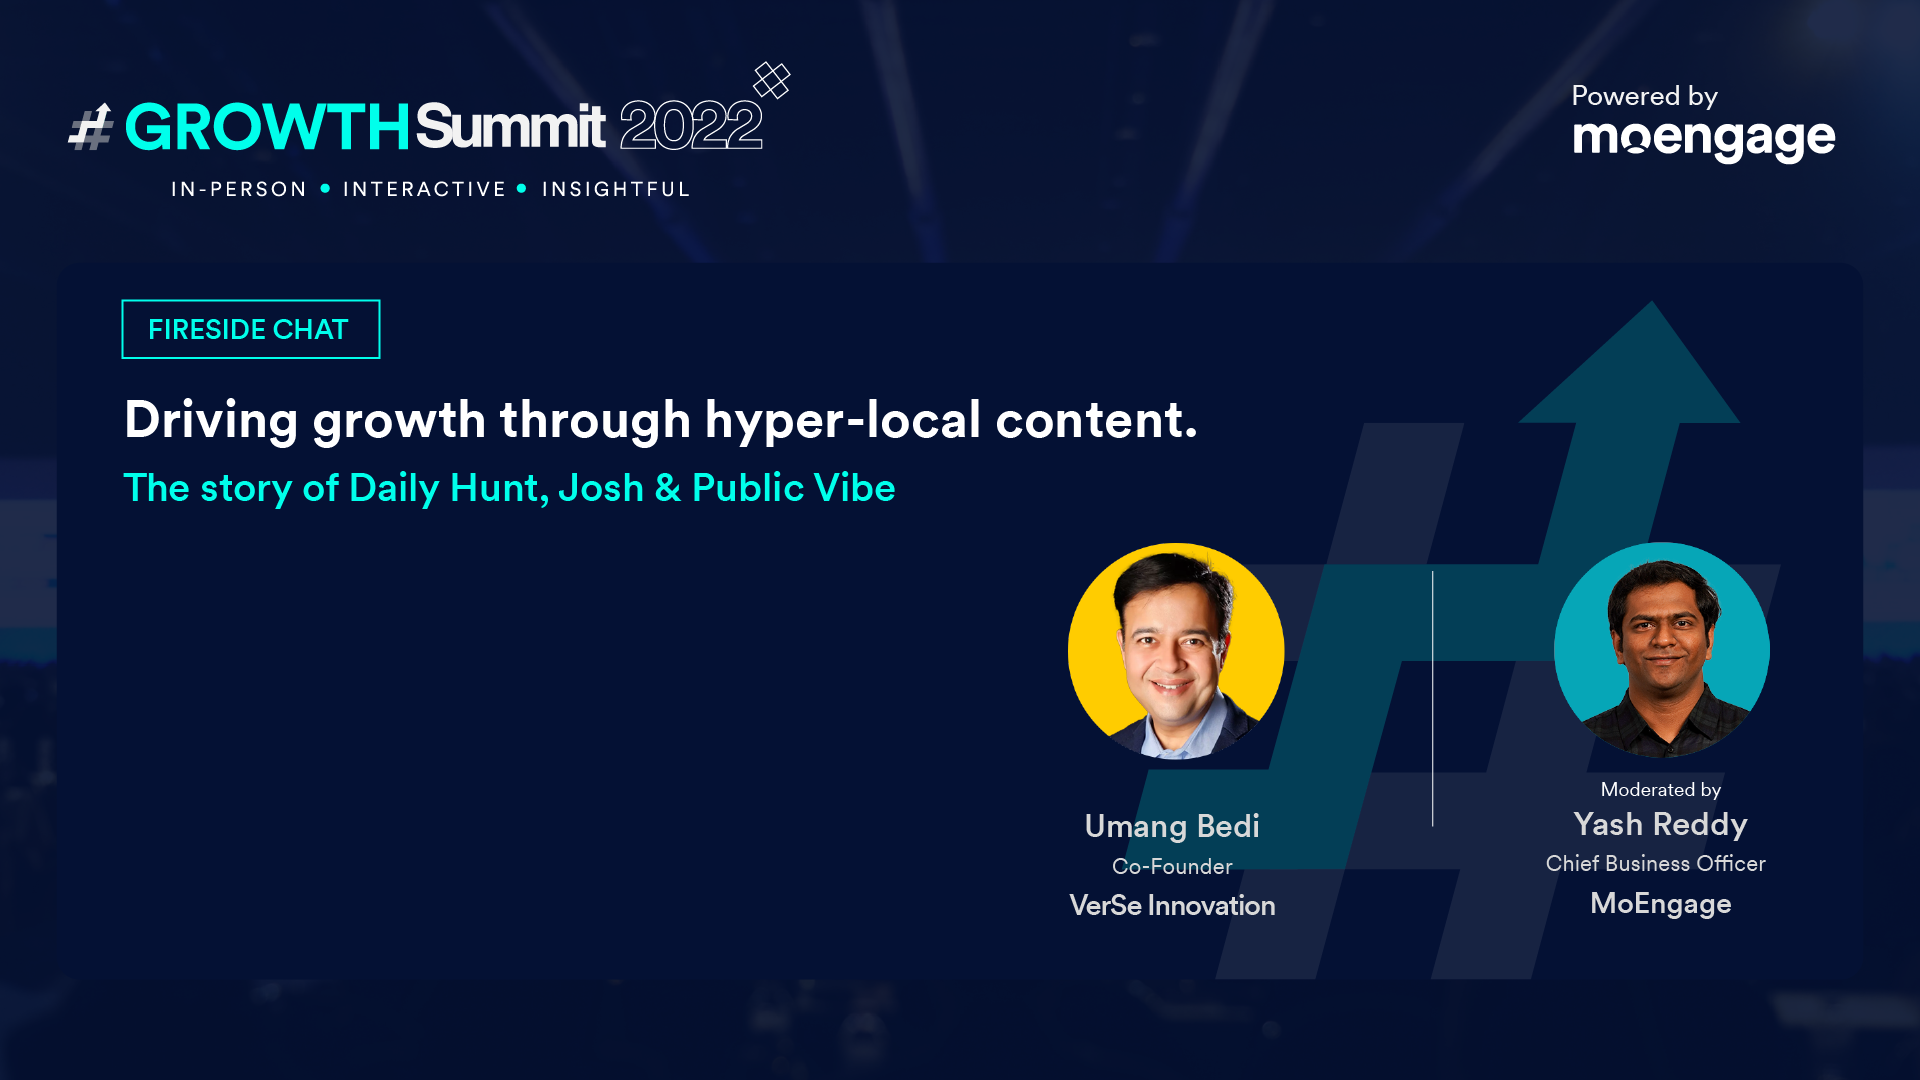 Going Desi: The triumph of hyper-local content in The Daily Hunt, Josh & Public Vibe growth story